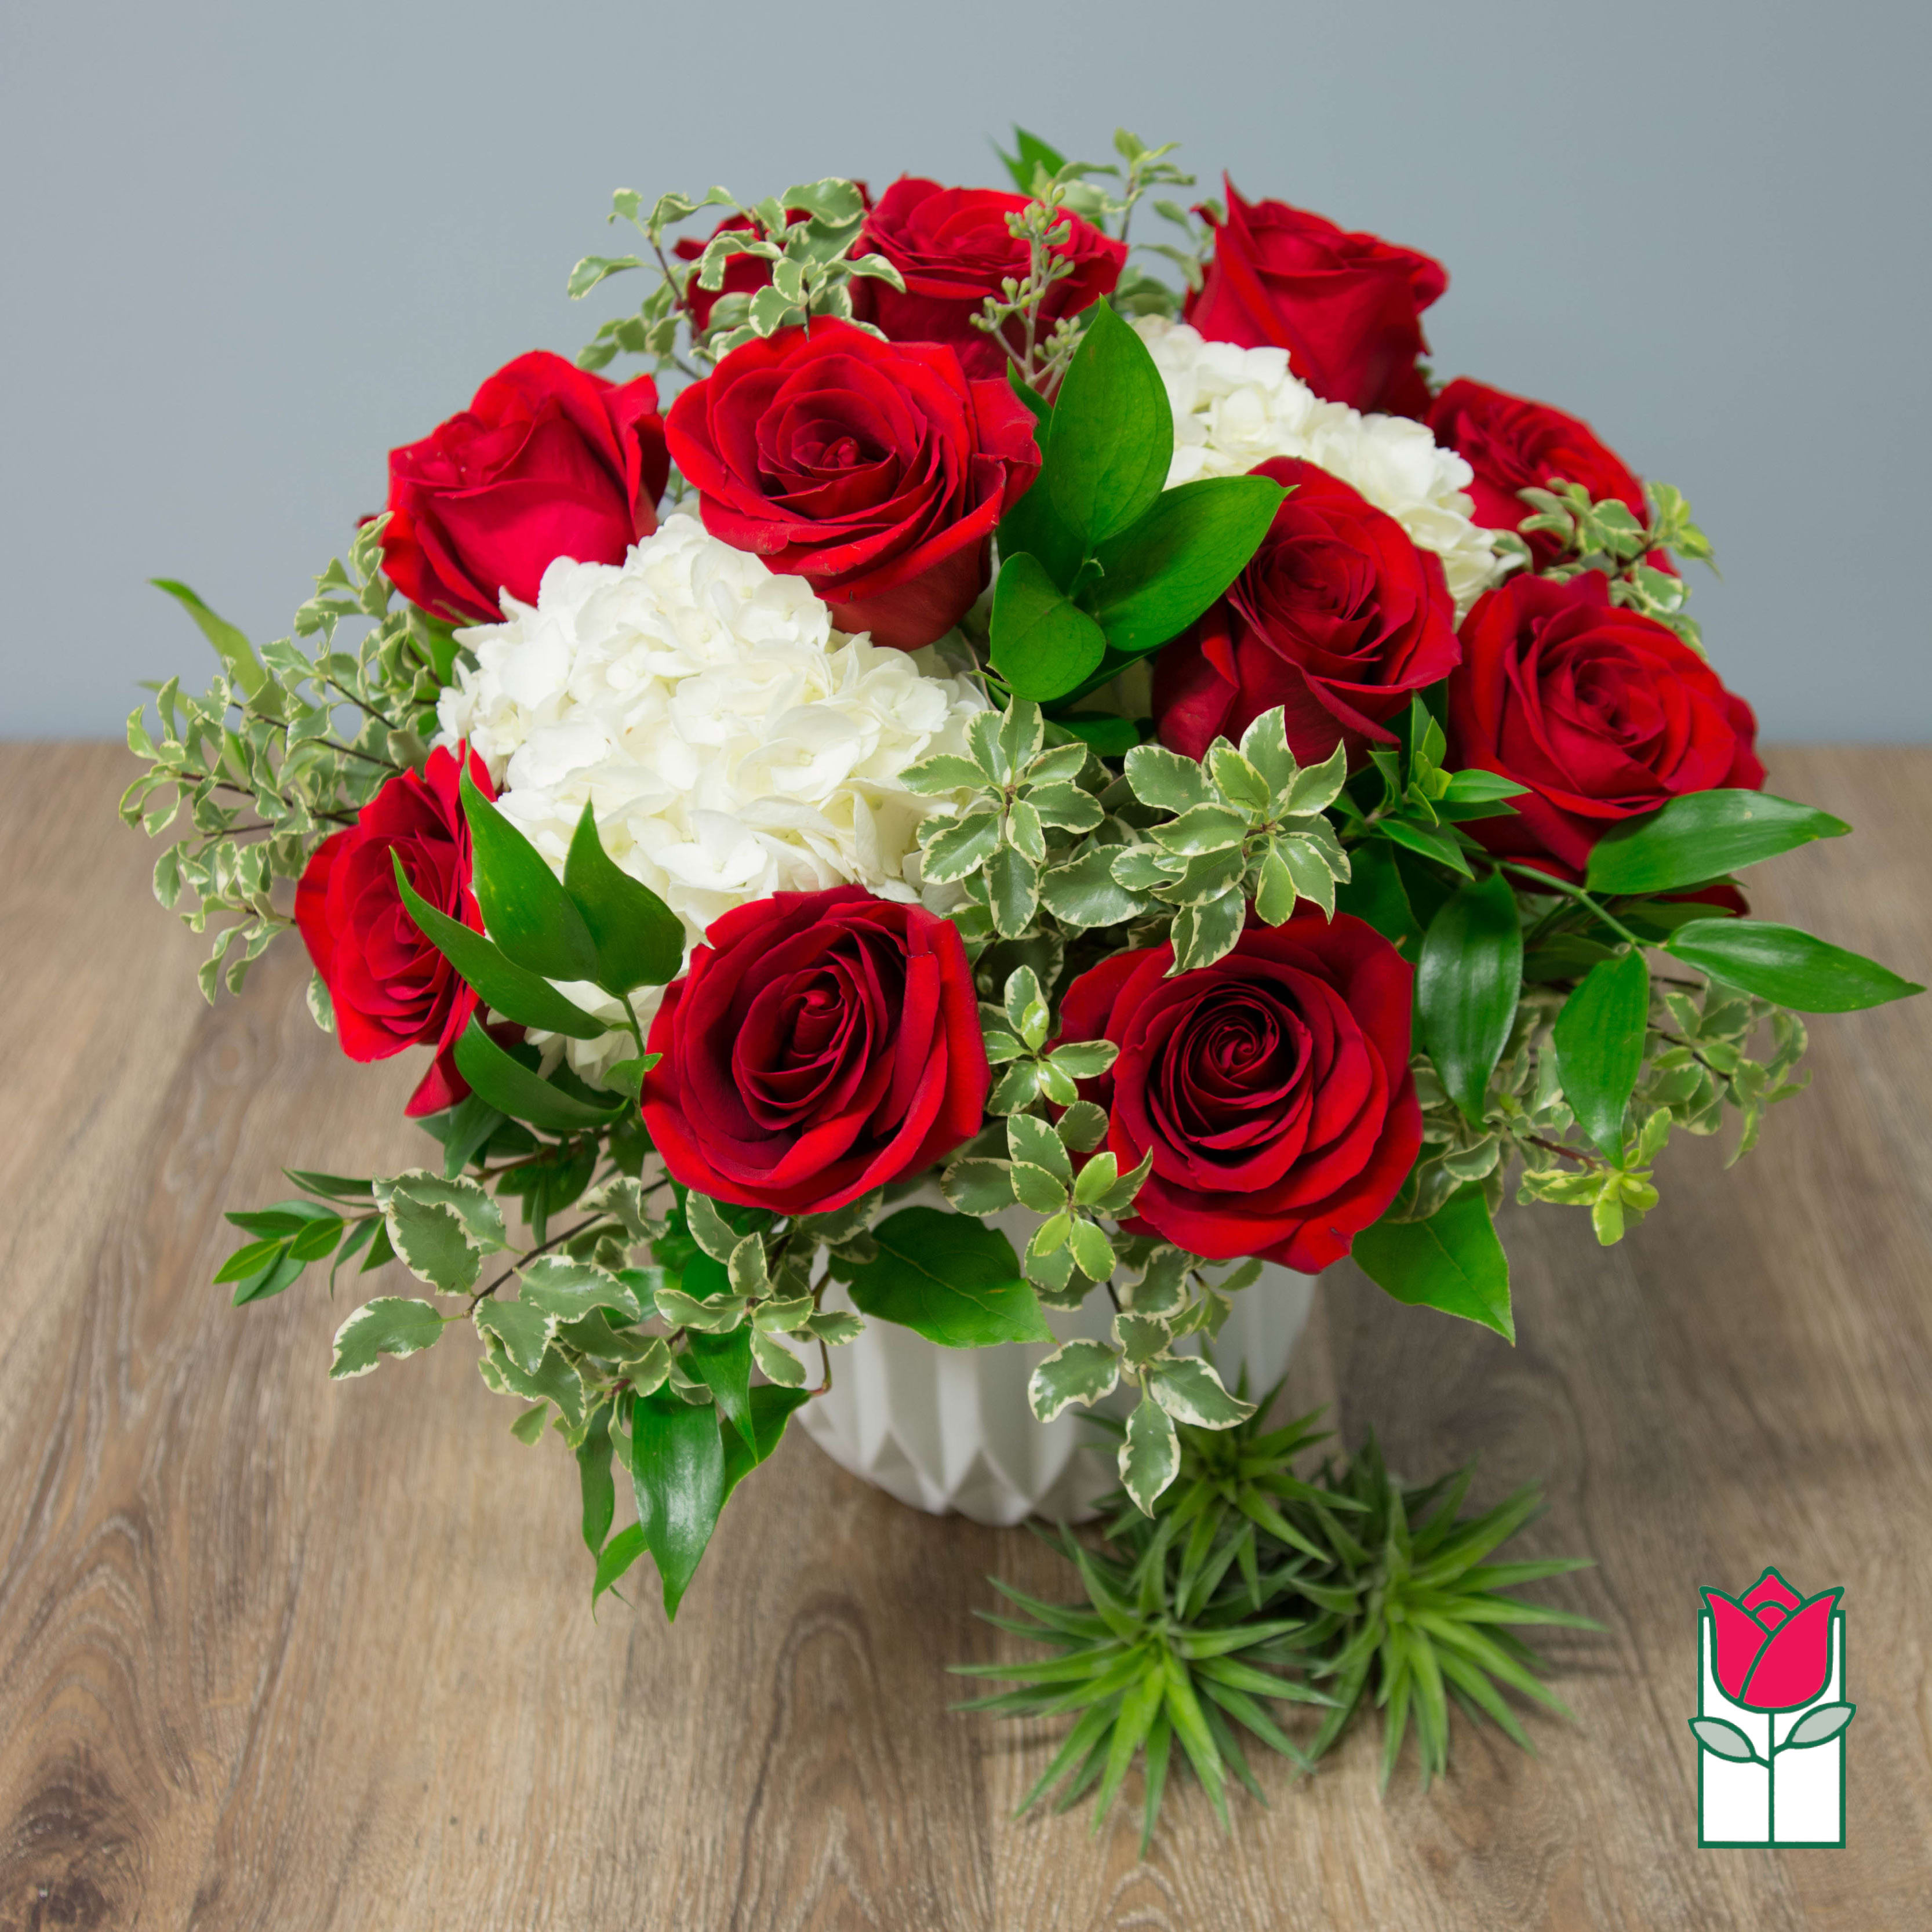 Beretania's Gianna Bouquet - The Beretania Florist Gianna Compact Bouquet - Special Advanced Order Required Approx. 14H X 10W